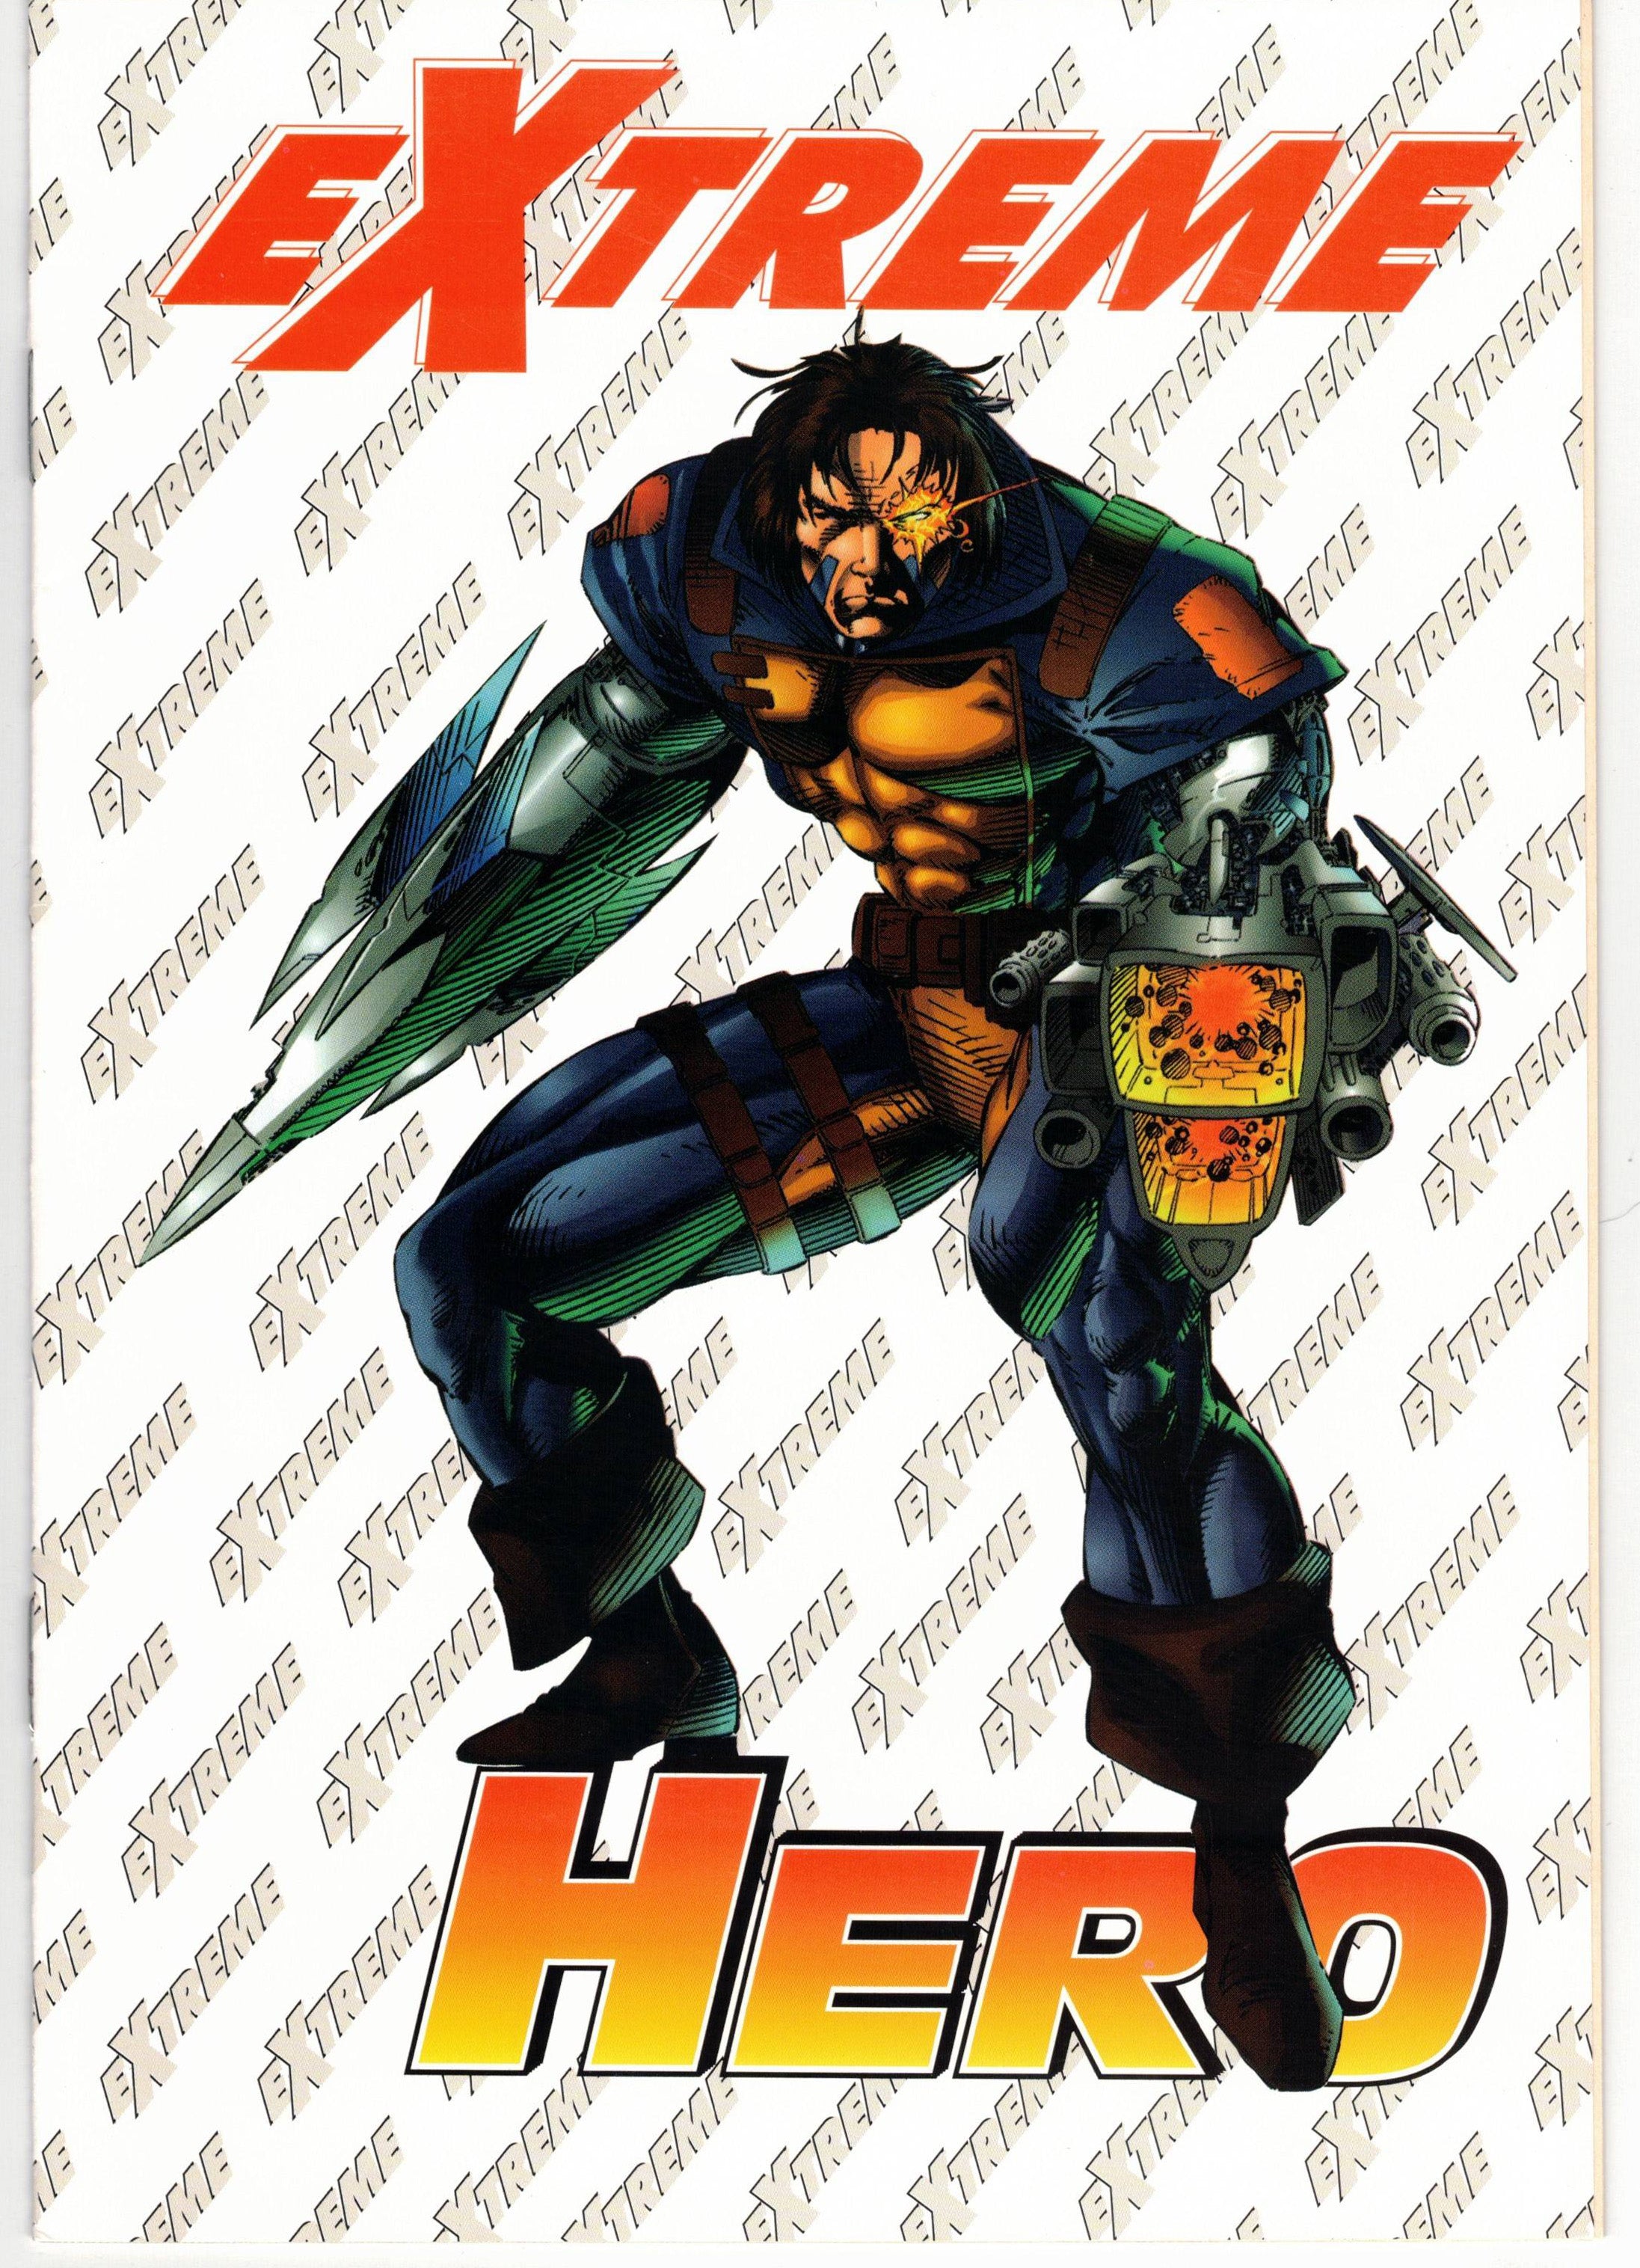 Photo of Extreme Hero (1994) Issue 1 - Near Mint Comic sold by Stronghold Collectibles